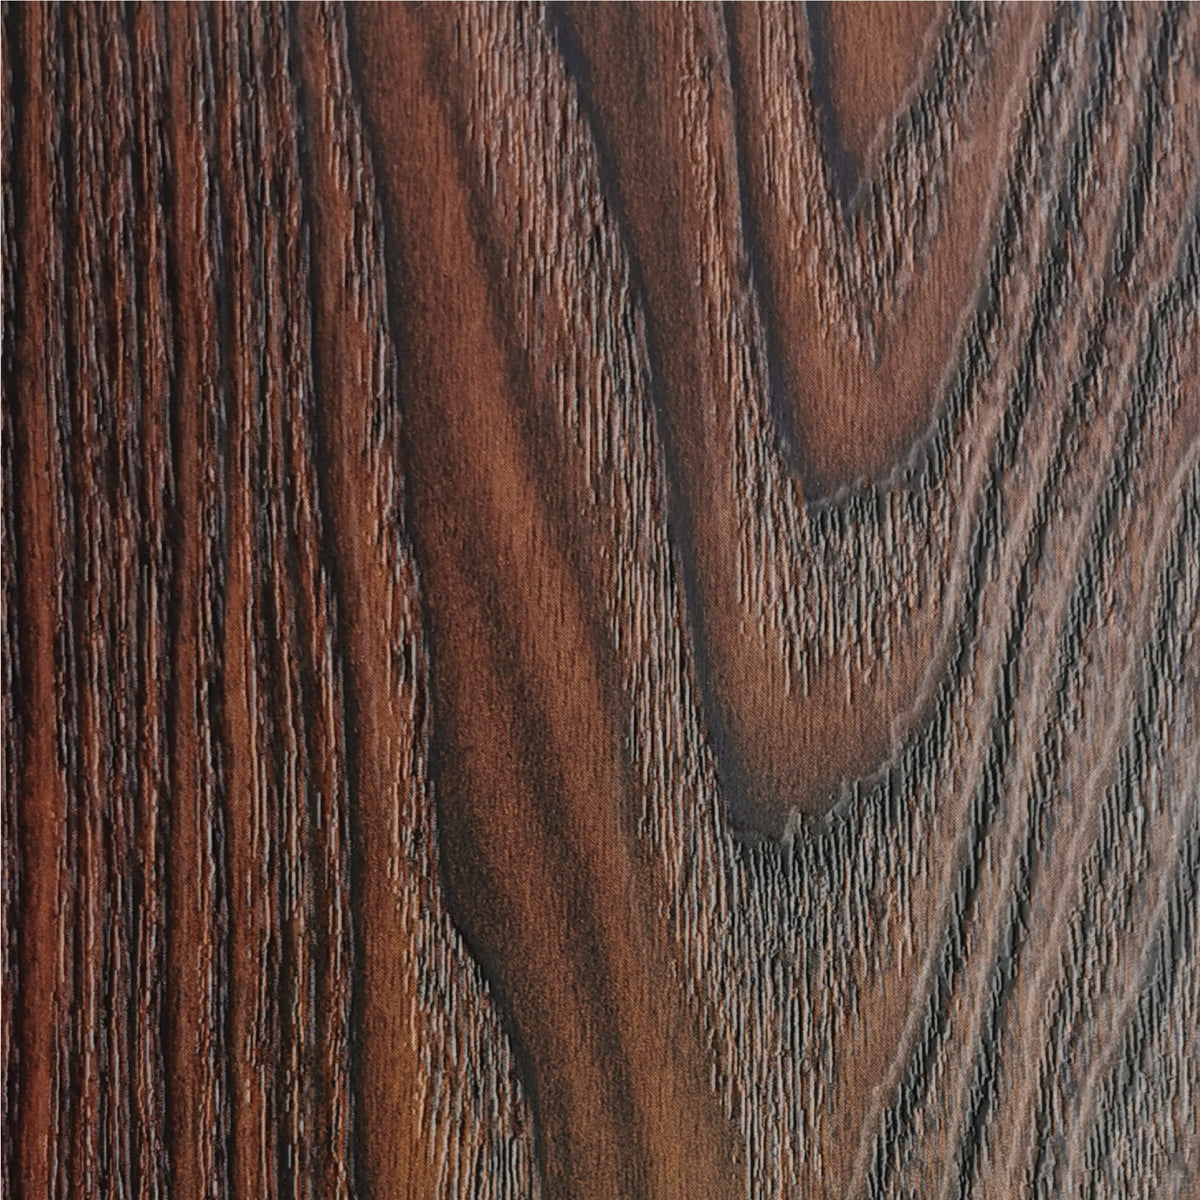 Timber Style Melamine Panel in Mystic Oak 1220mmx2440mmx18mm